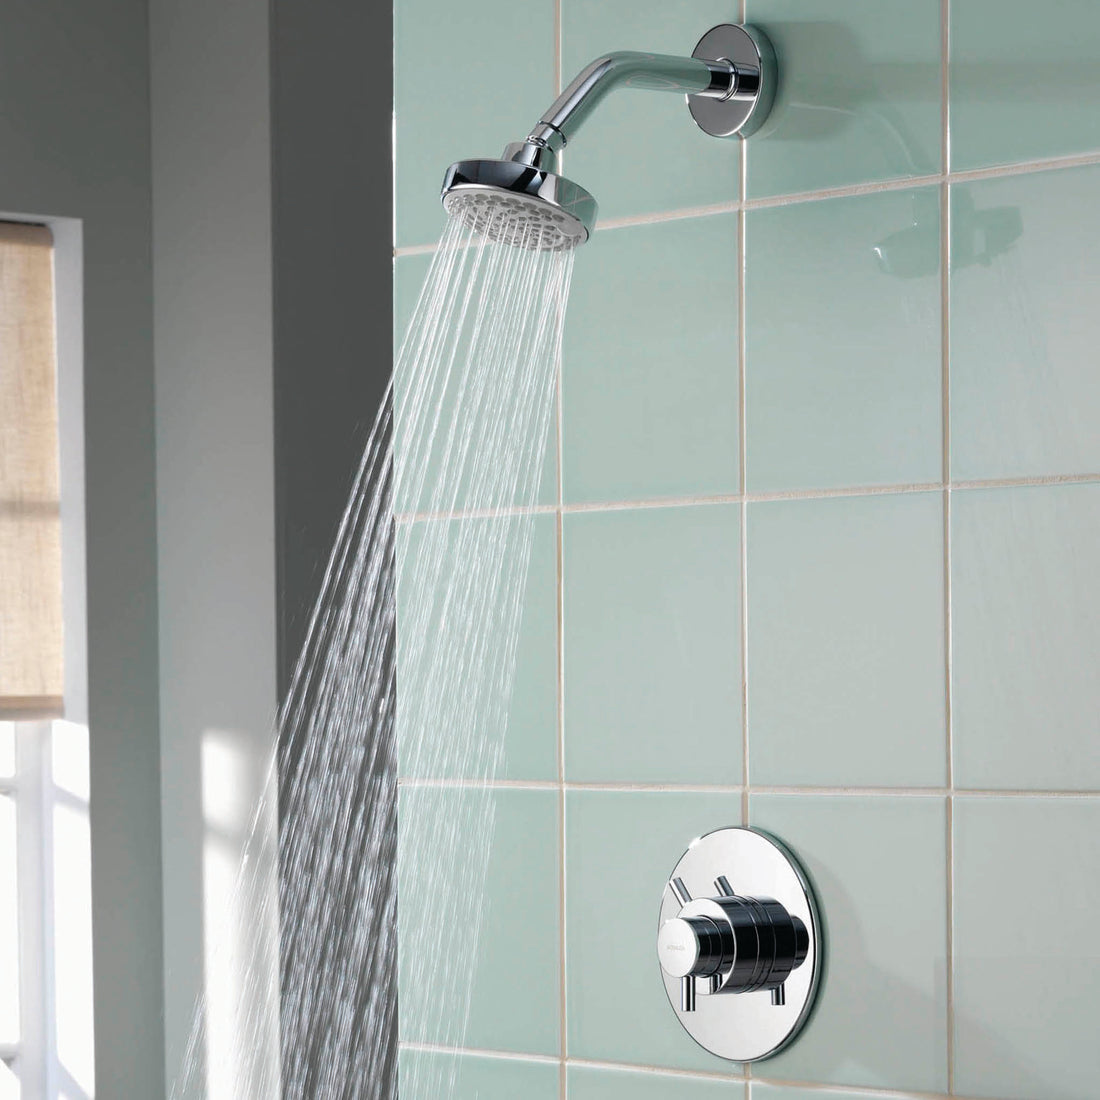 Aqualisa Aspire Mixer Shower with green wall tiles with water flowing ASP001CF